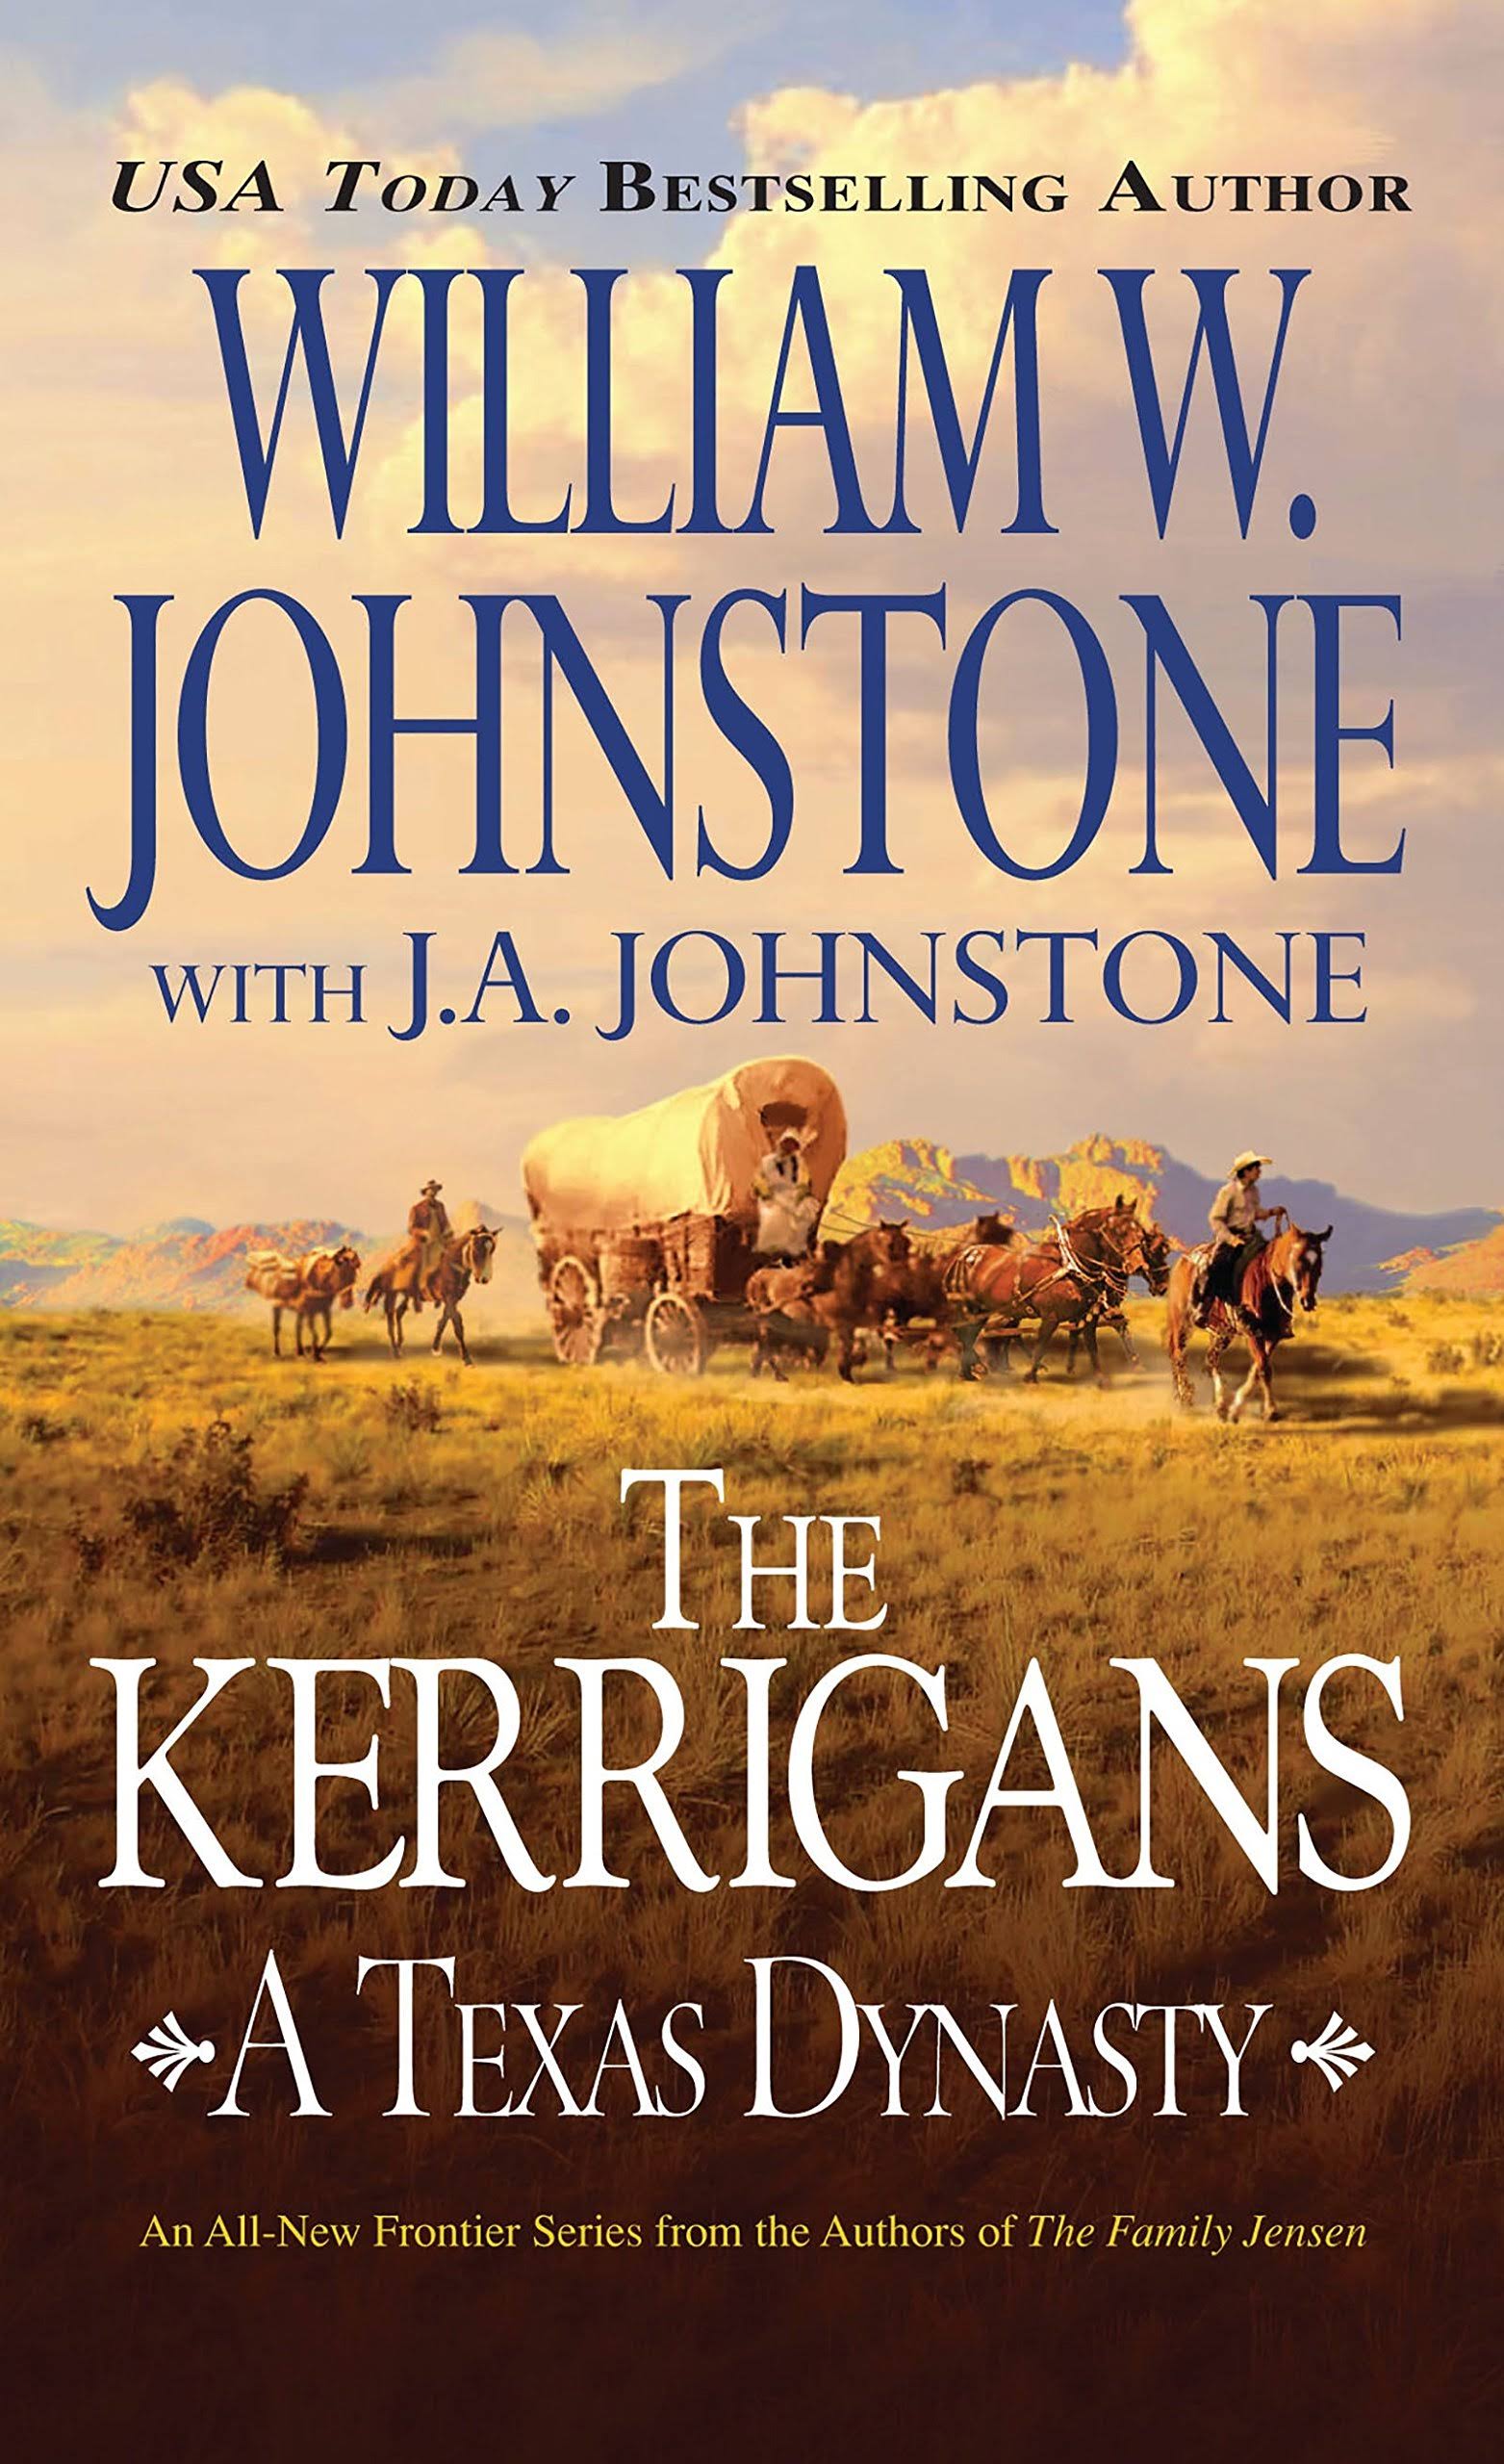 The Kerrigans: A Texas Dynasty - William W. Johnstone and J.A. Johnstone